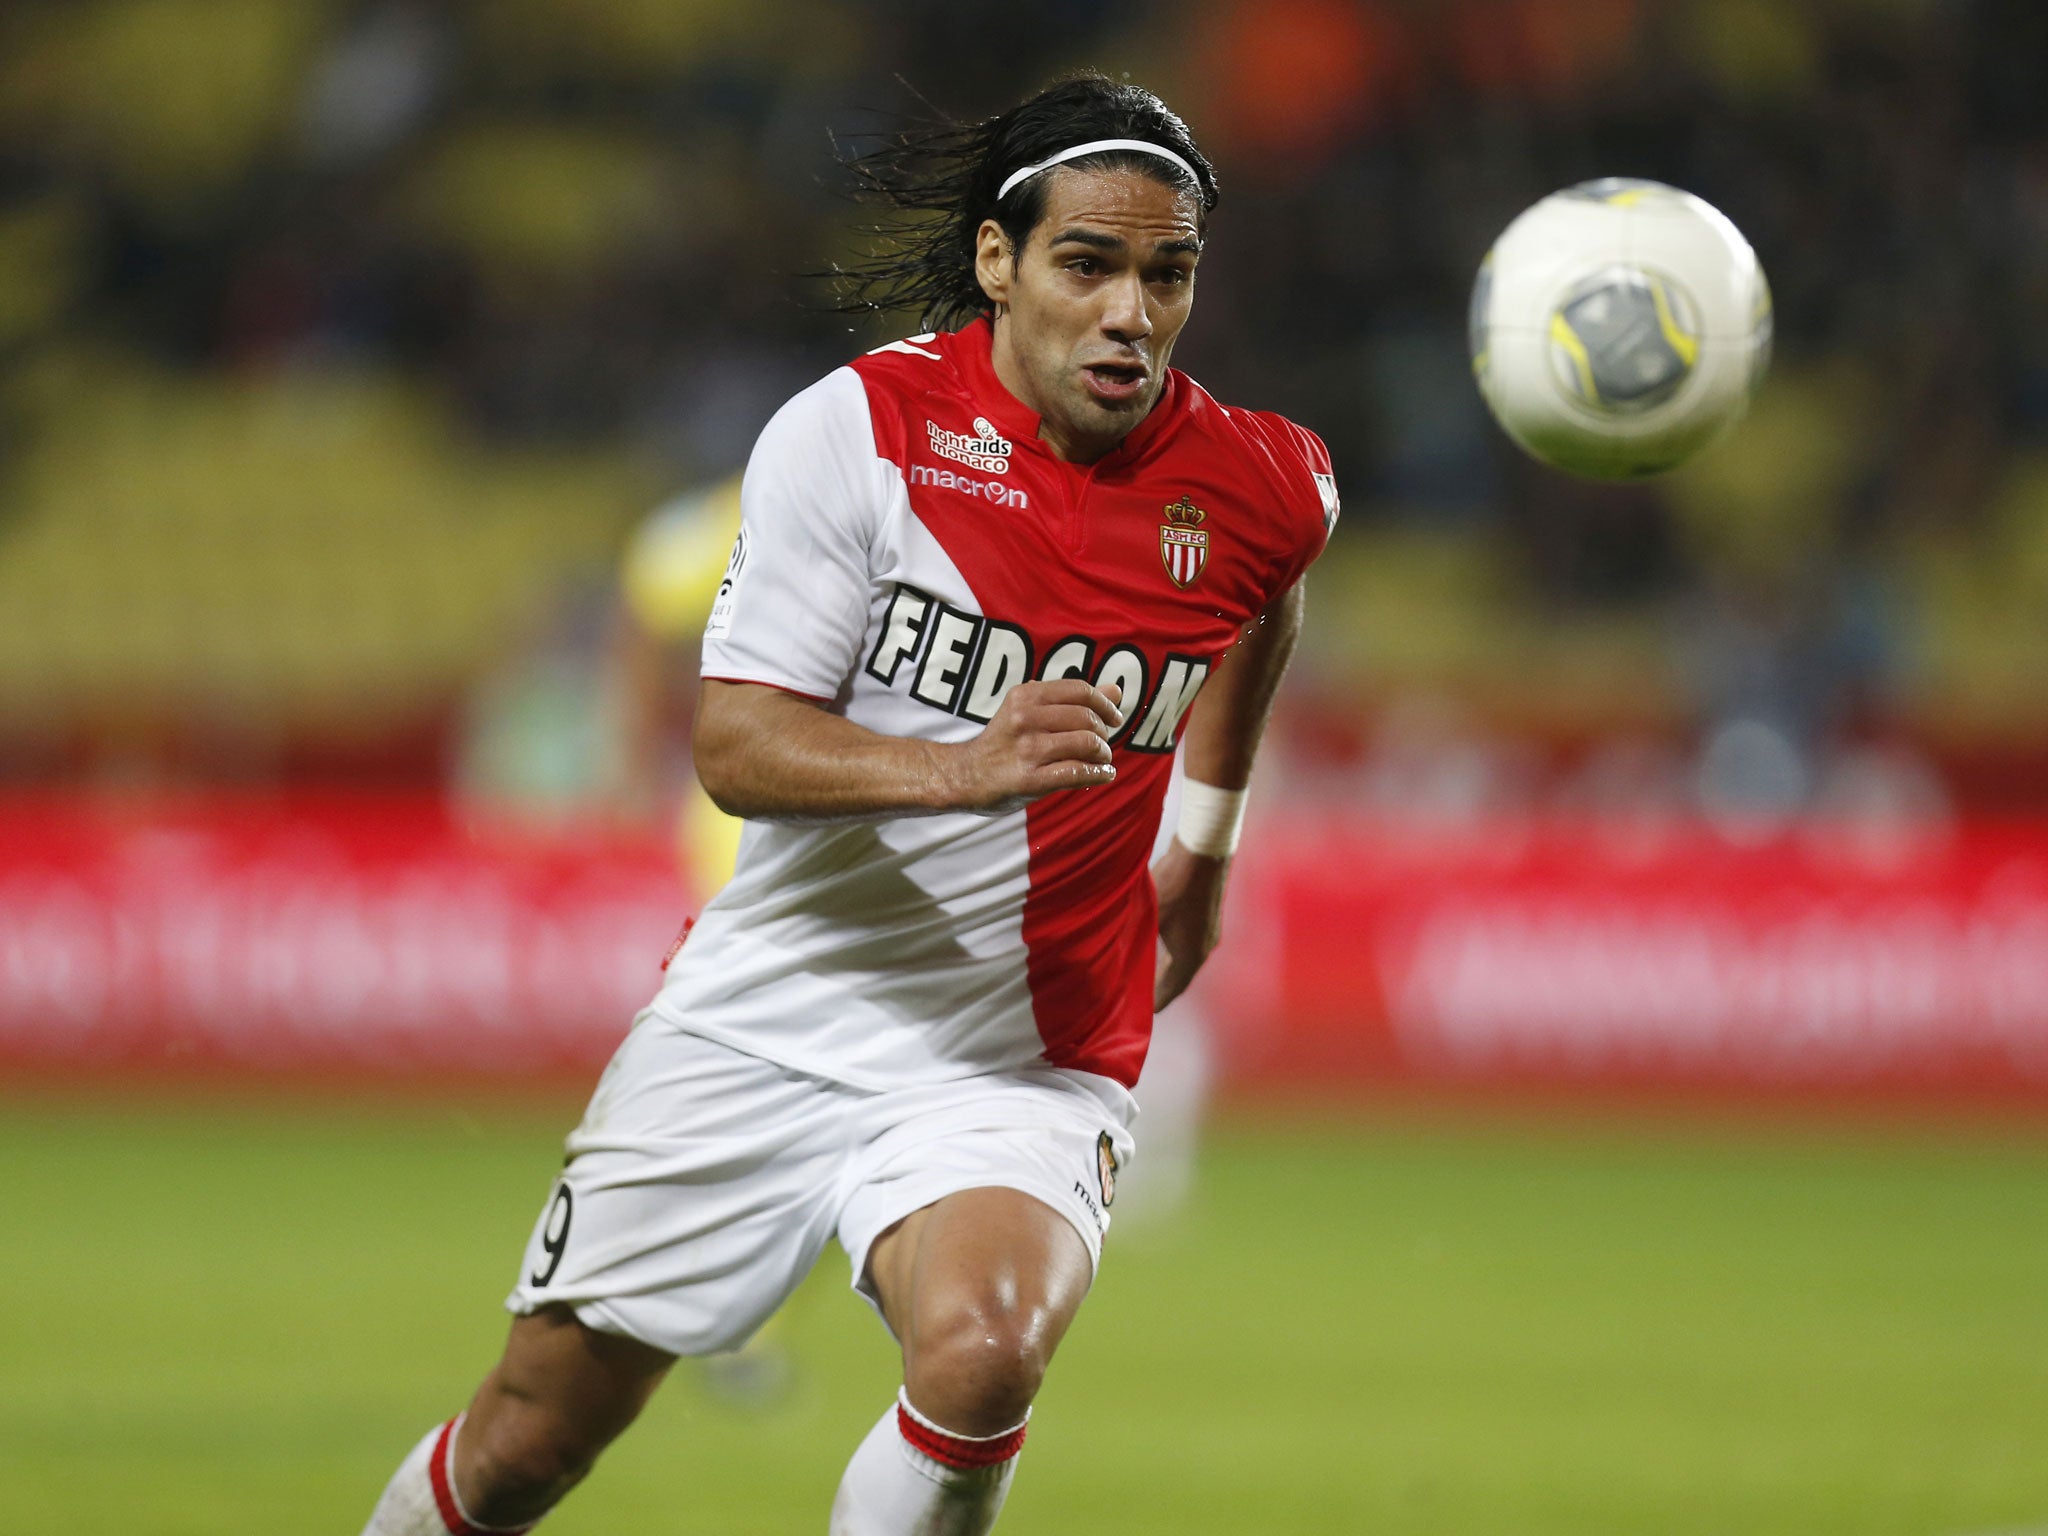 Radamel Falcao could be the subject of a £60m bid from Chelsea with Jose Mourinho set to watch him on Thursday for Colombia